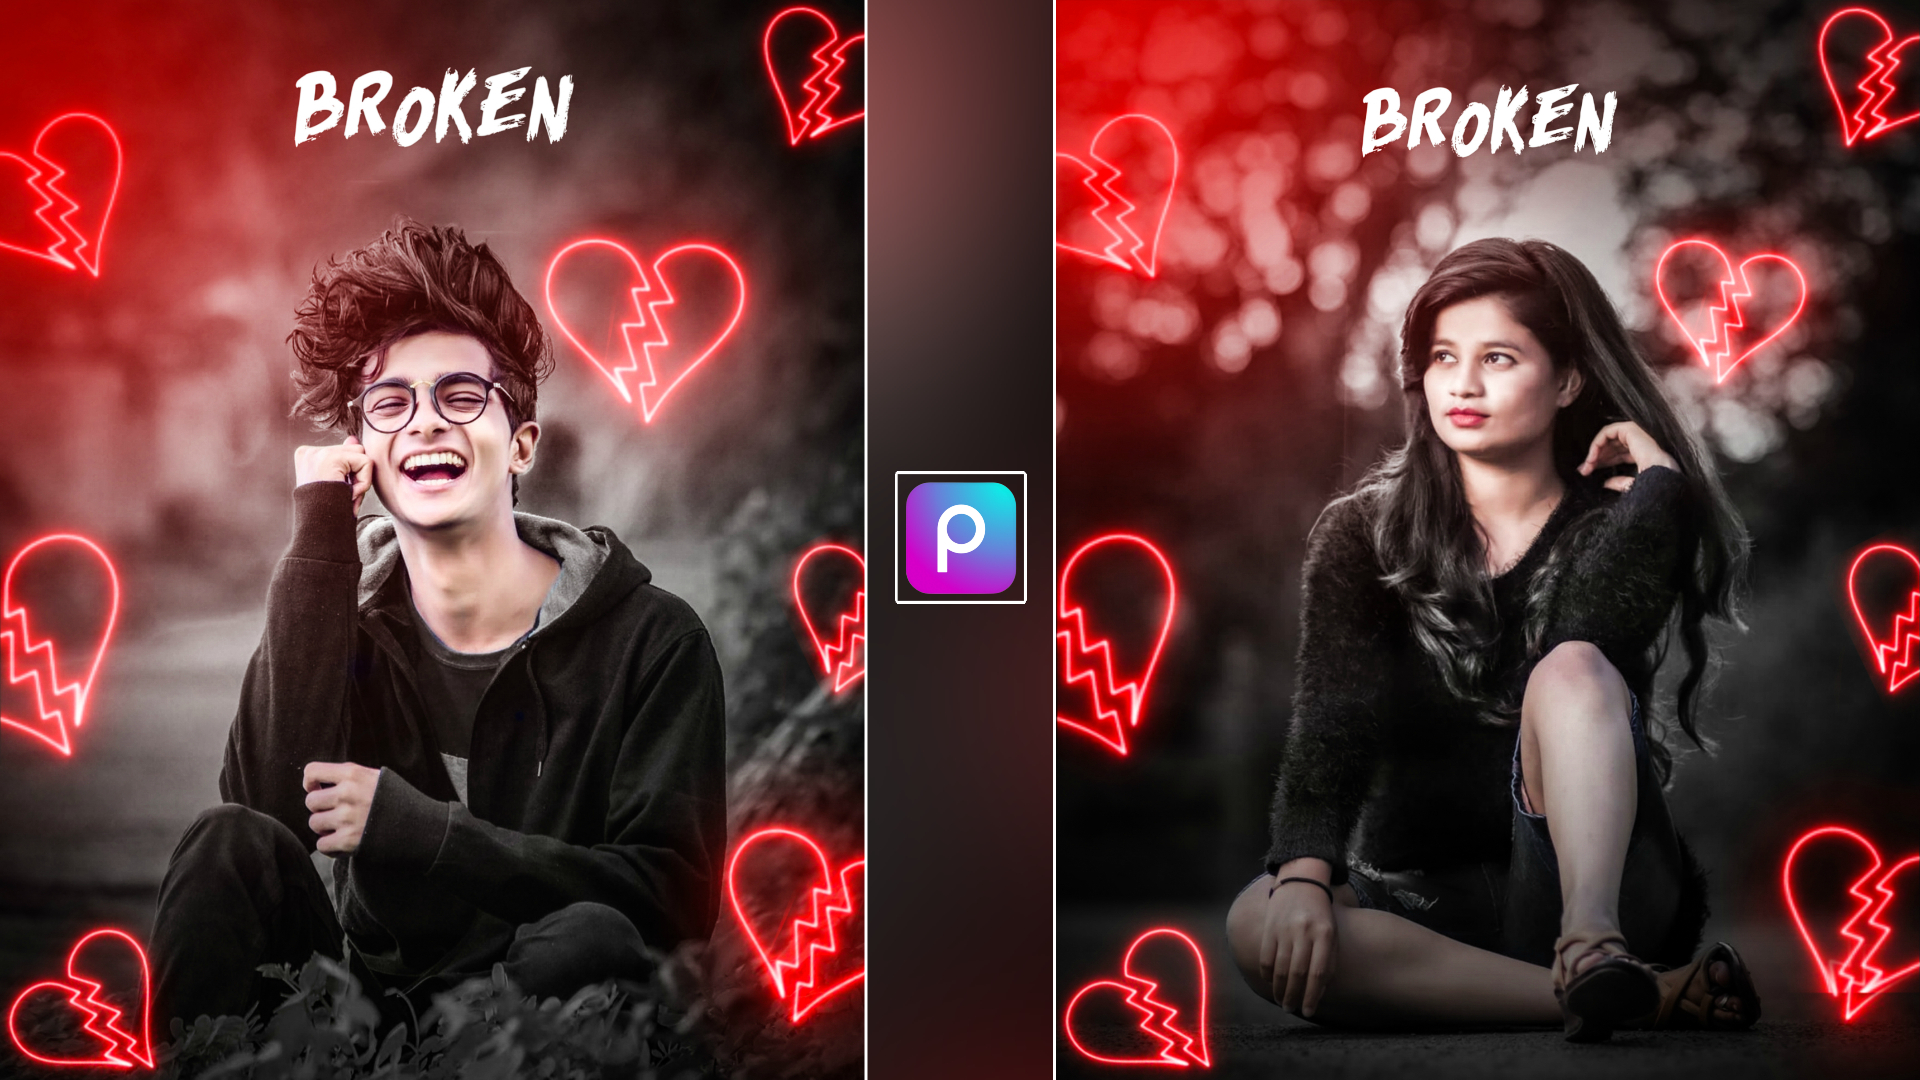 Broken heart background and png download - DJ PHOTO EDITING